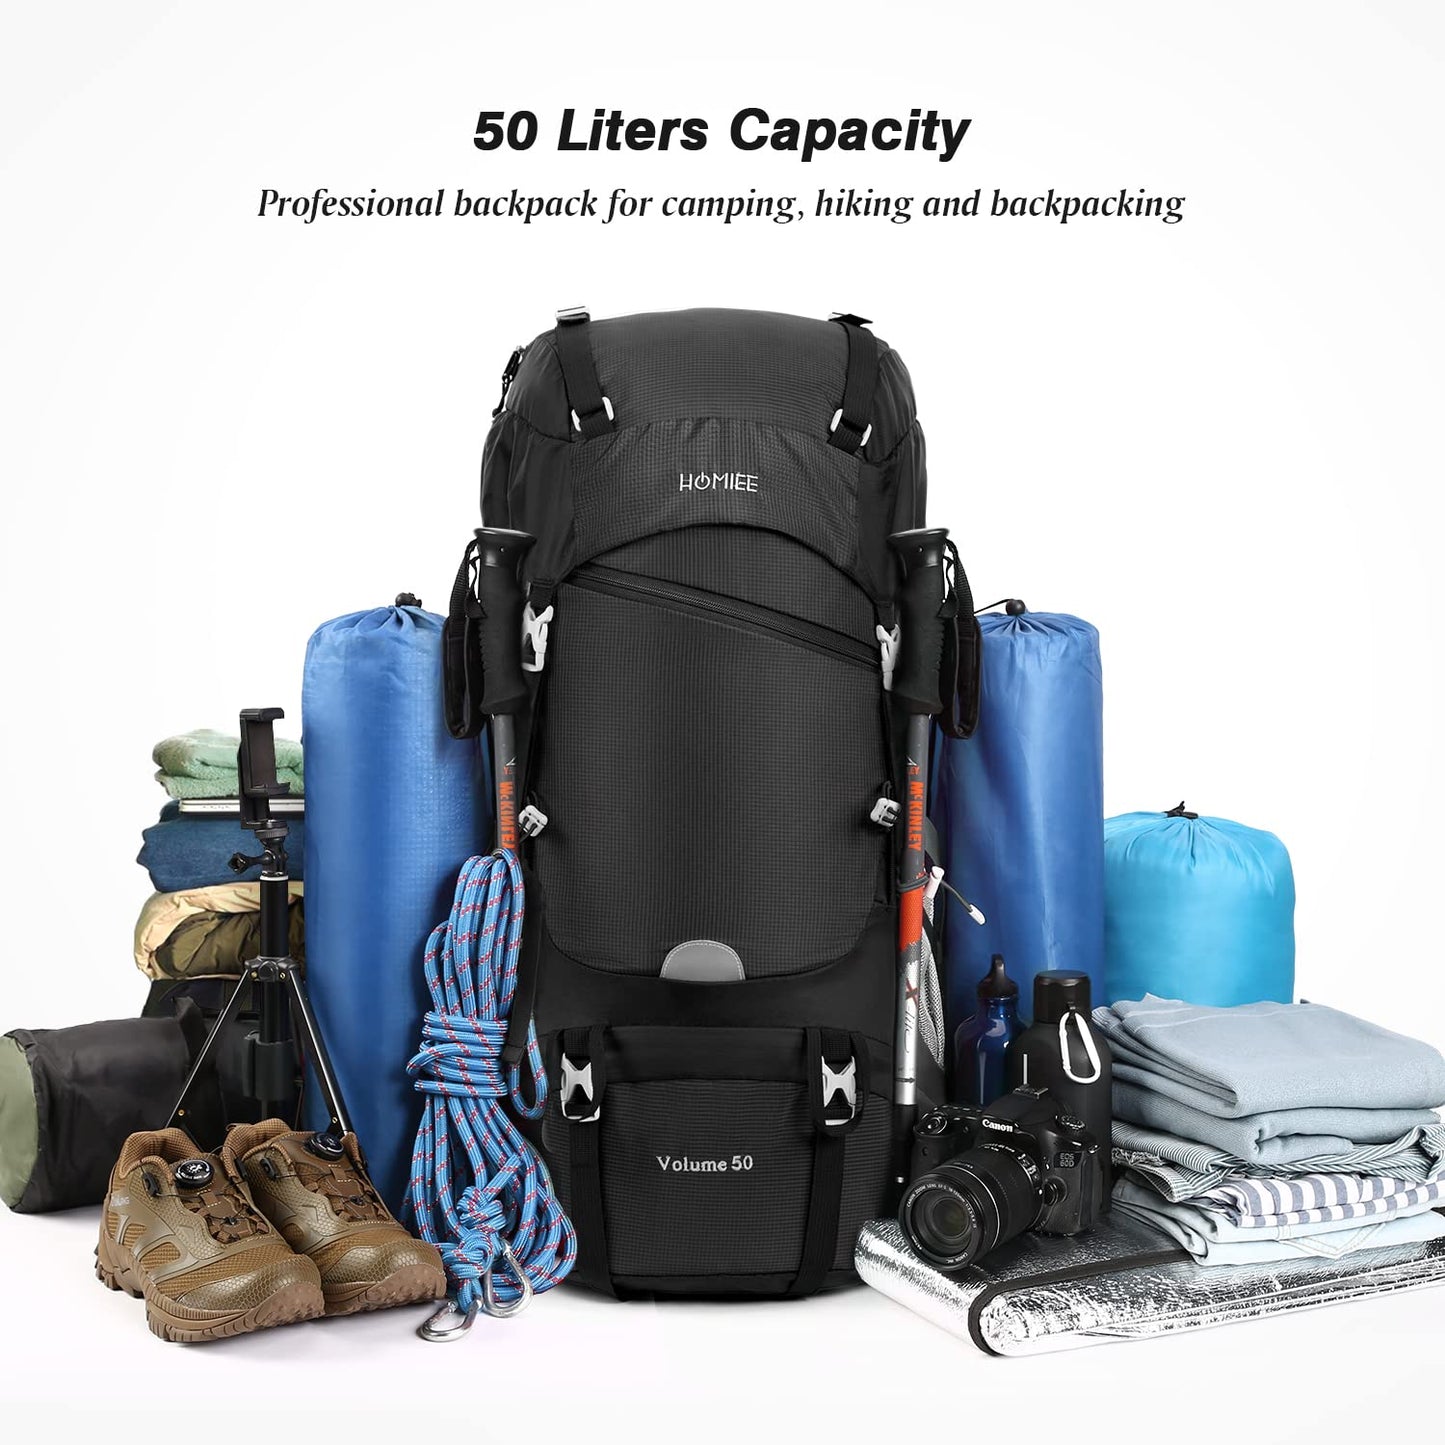 HOMIEE 50L Hiking Backpack Travel Backpack Waterproof Daypack Outdoor Camping Climbing Backpack with Rain Cover